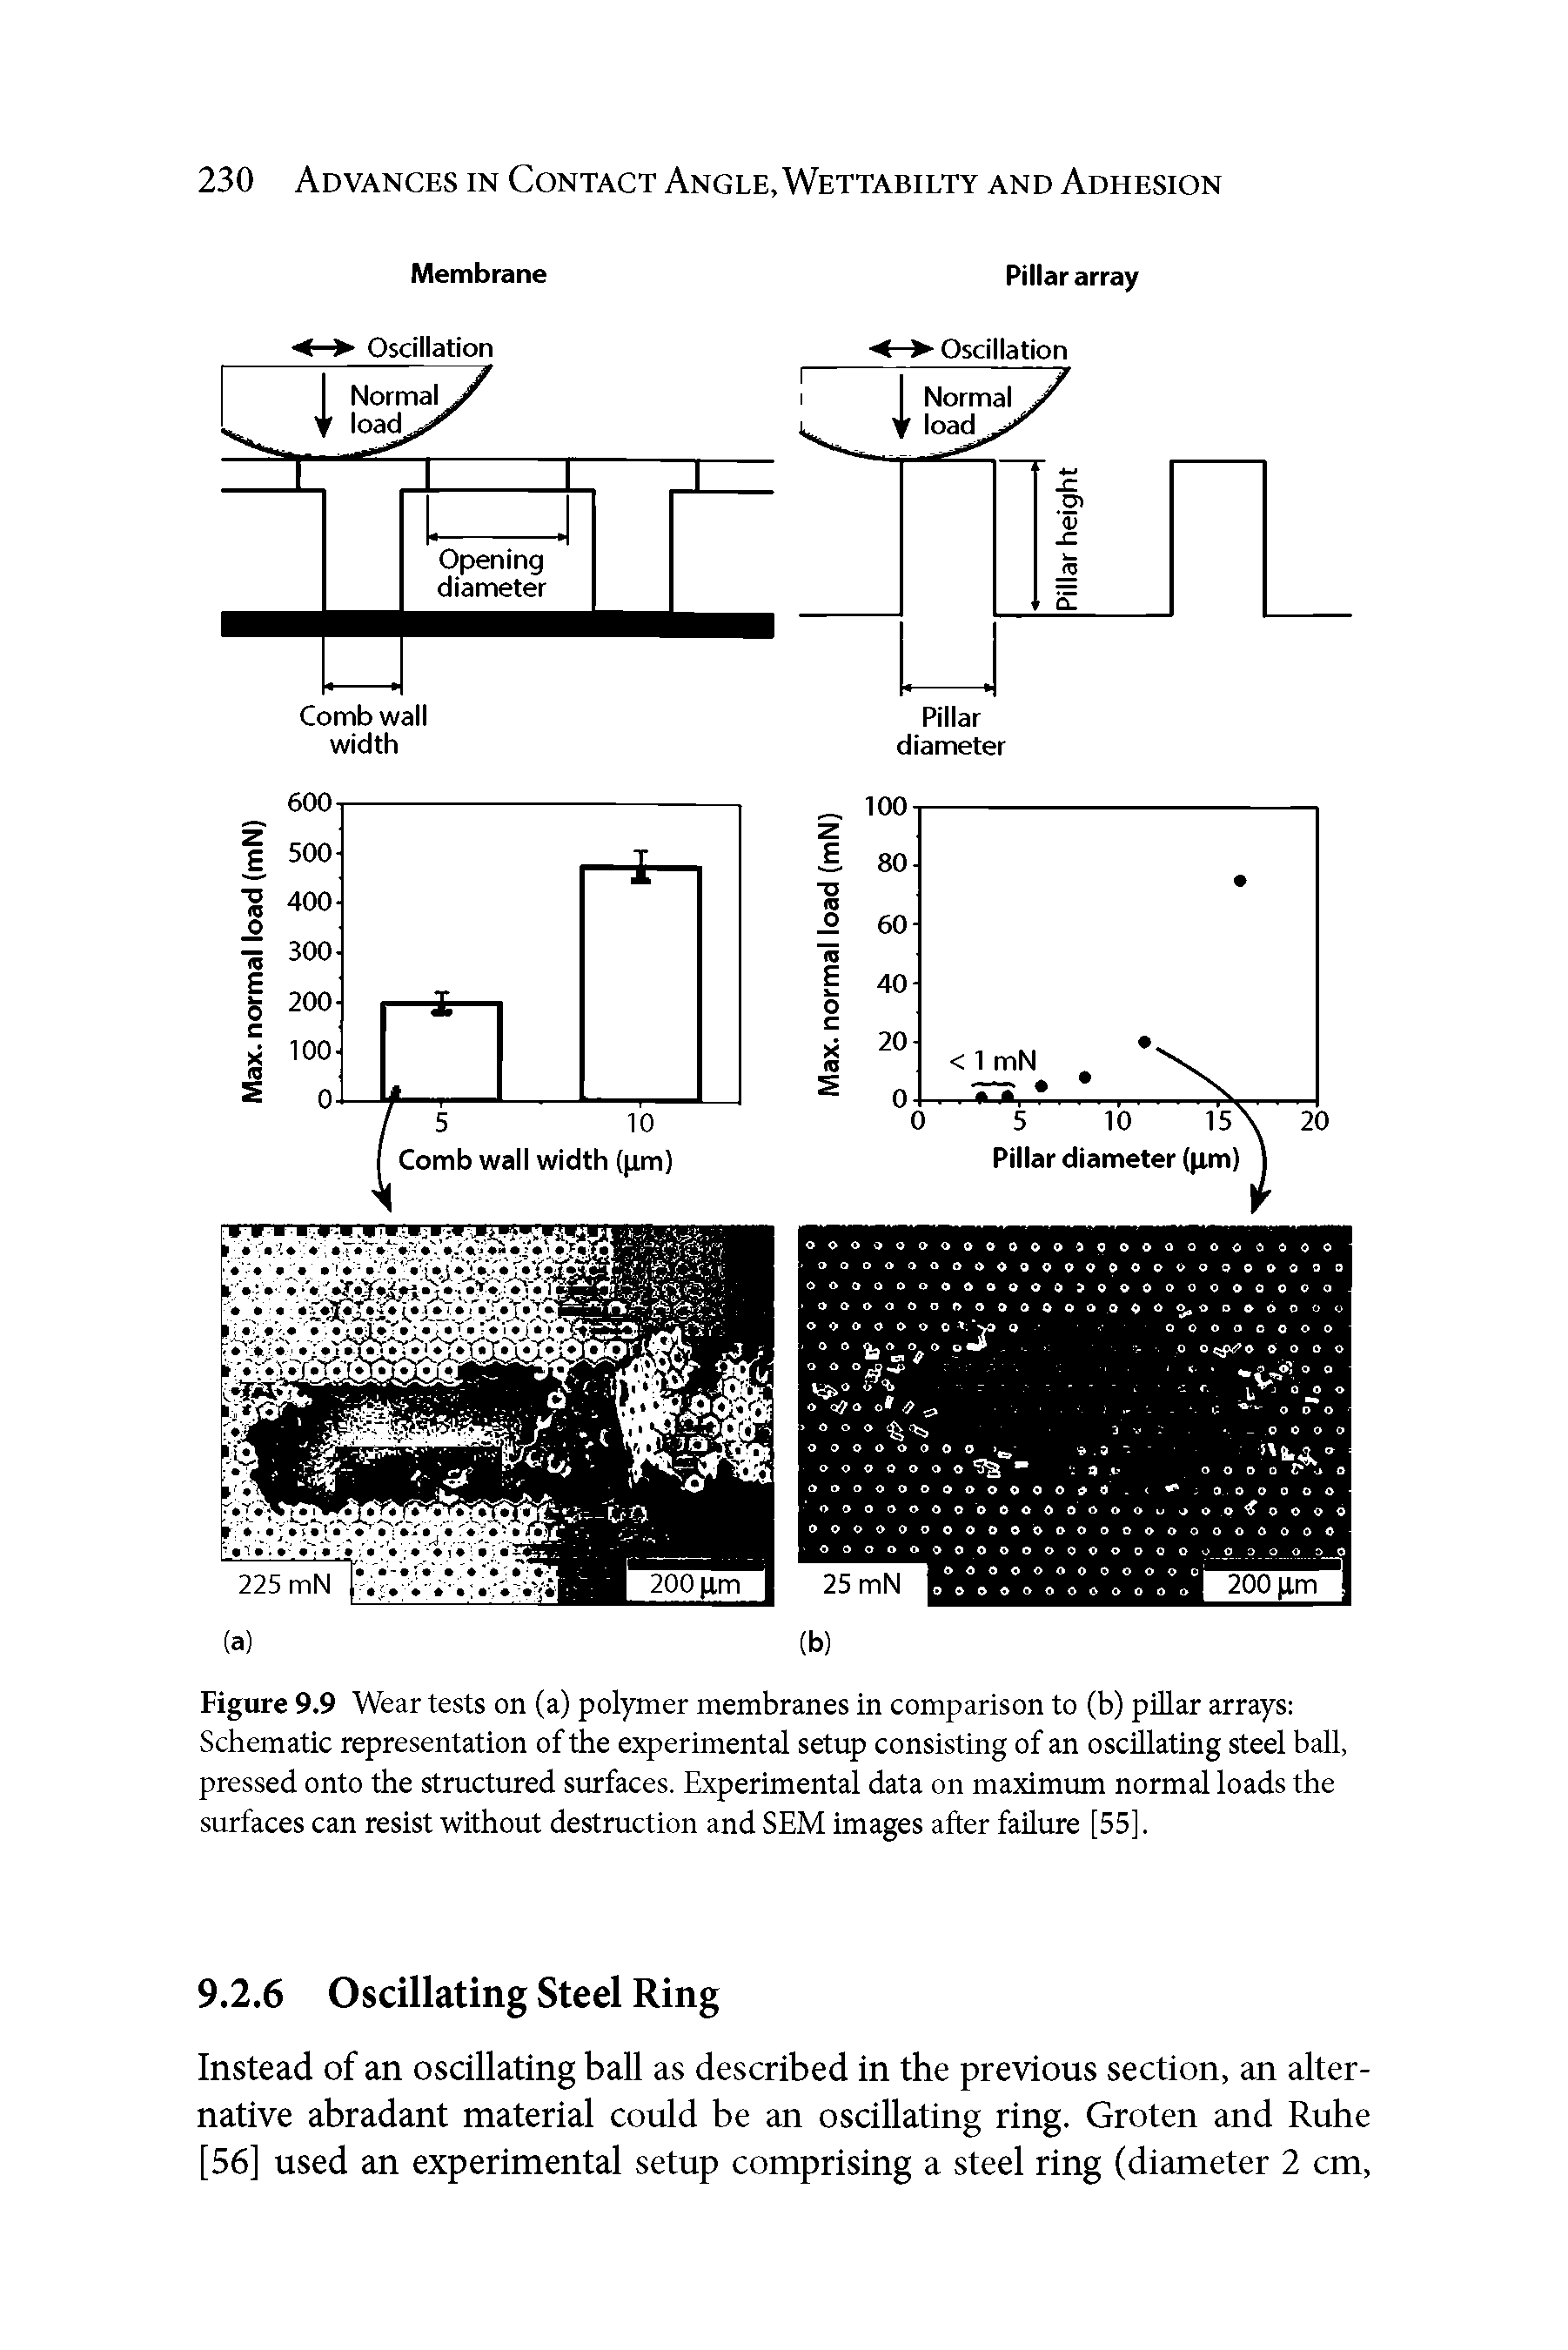 Figure 9.9 Wear tests on (a) polymer membranes in comparison to (b) pillar arrays Schematic representation of the experimental setup consisting of an oscillating steel ball, pressed onto the structured surfaces. Experimental data on maximum normal loads the surfaces can resist without destruction and SEM images after failure [55],...